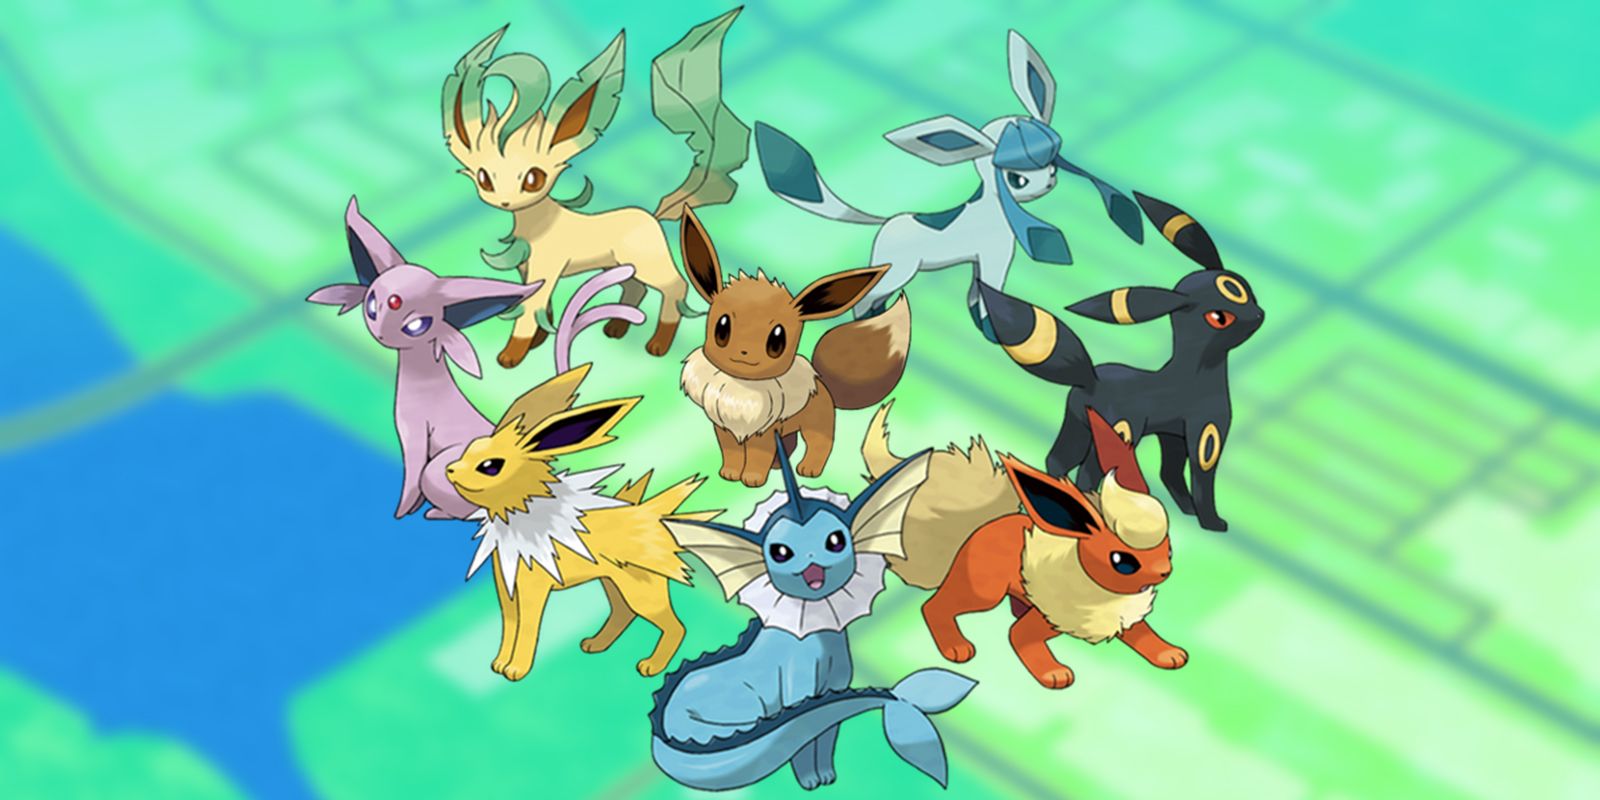 How to get the different Eevee evolutions - Pokémon GO